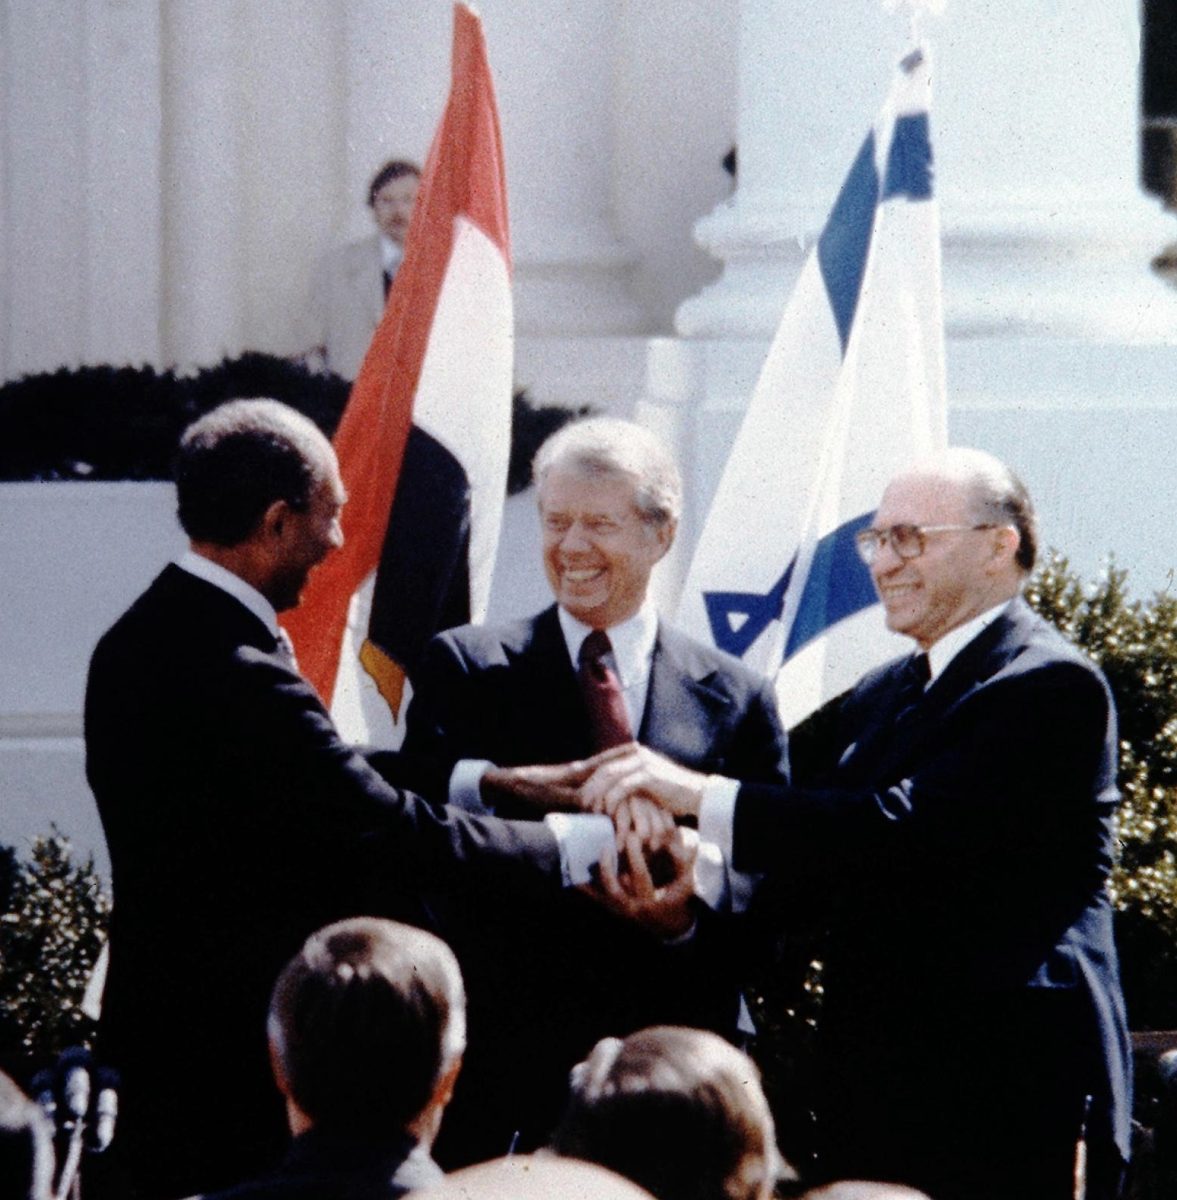 March 26, 1979- Israel-Egypt peace agreement signed